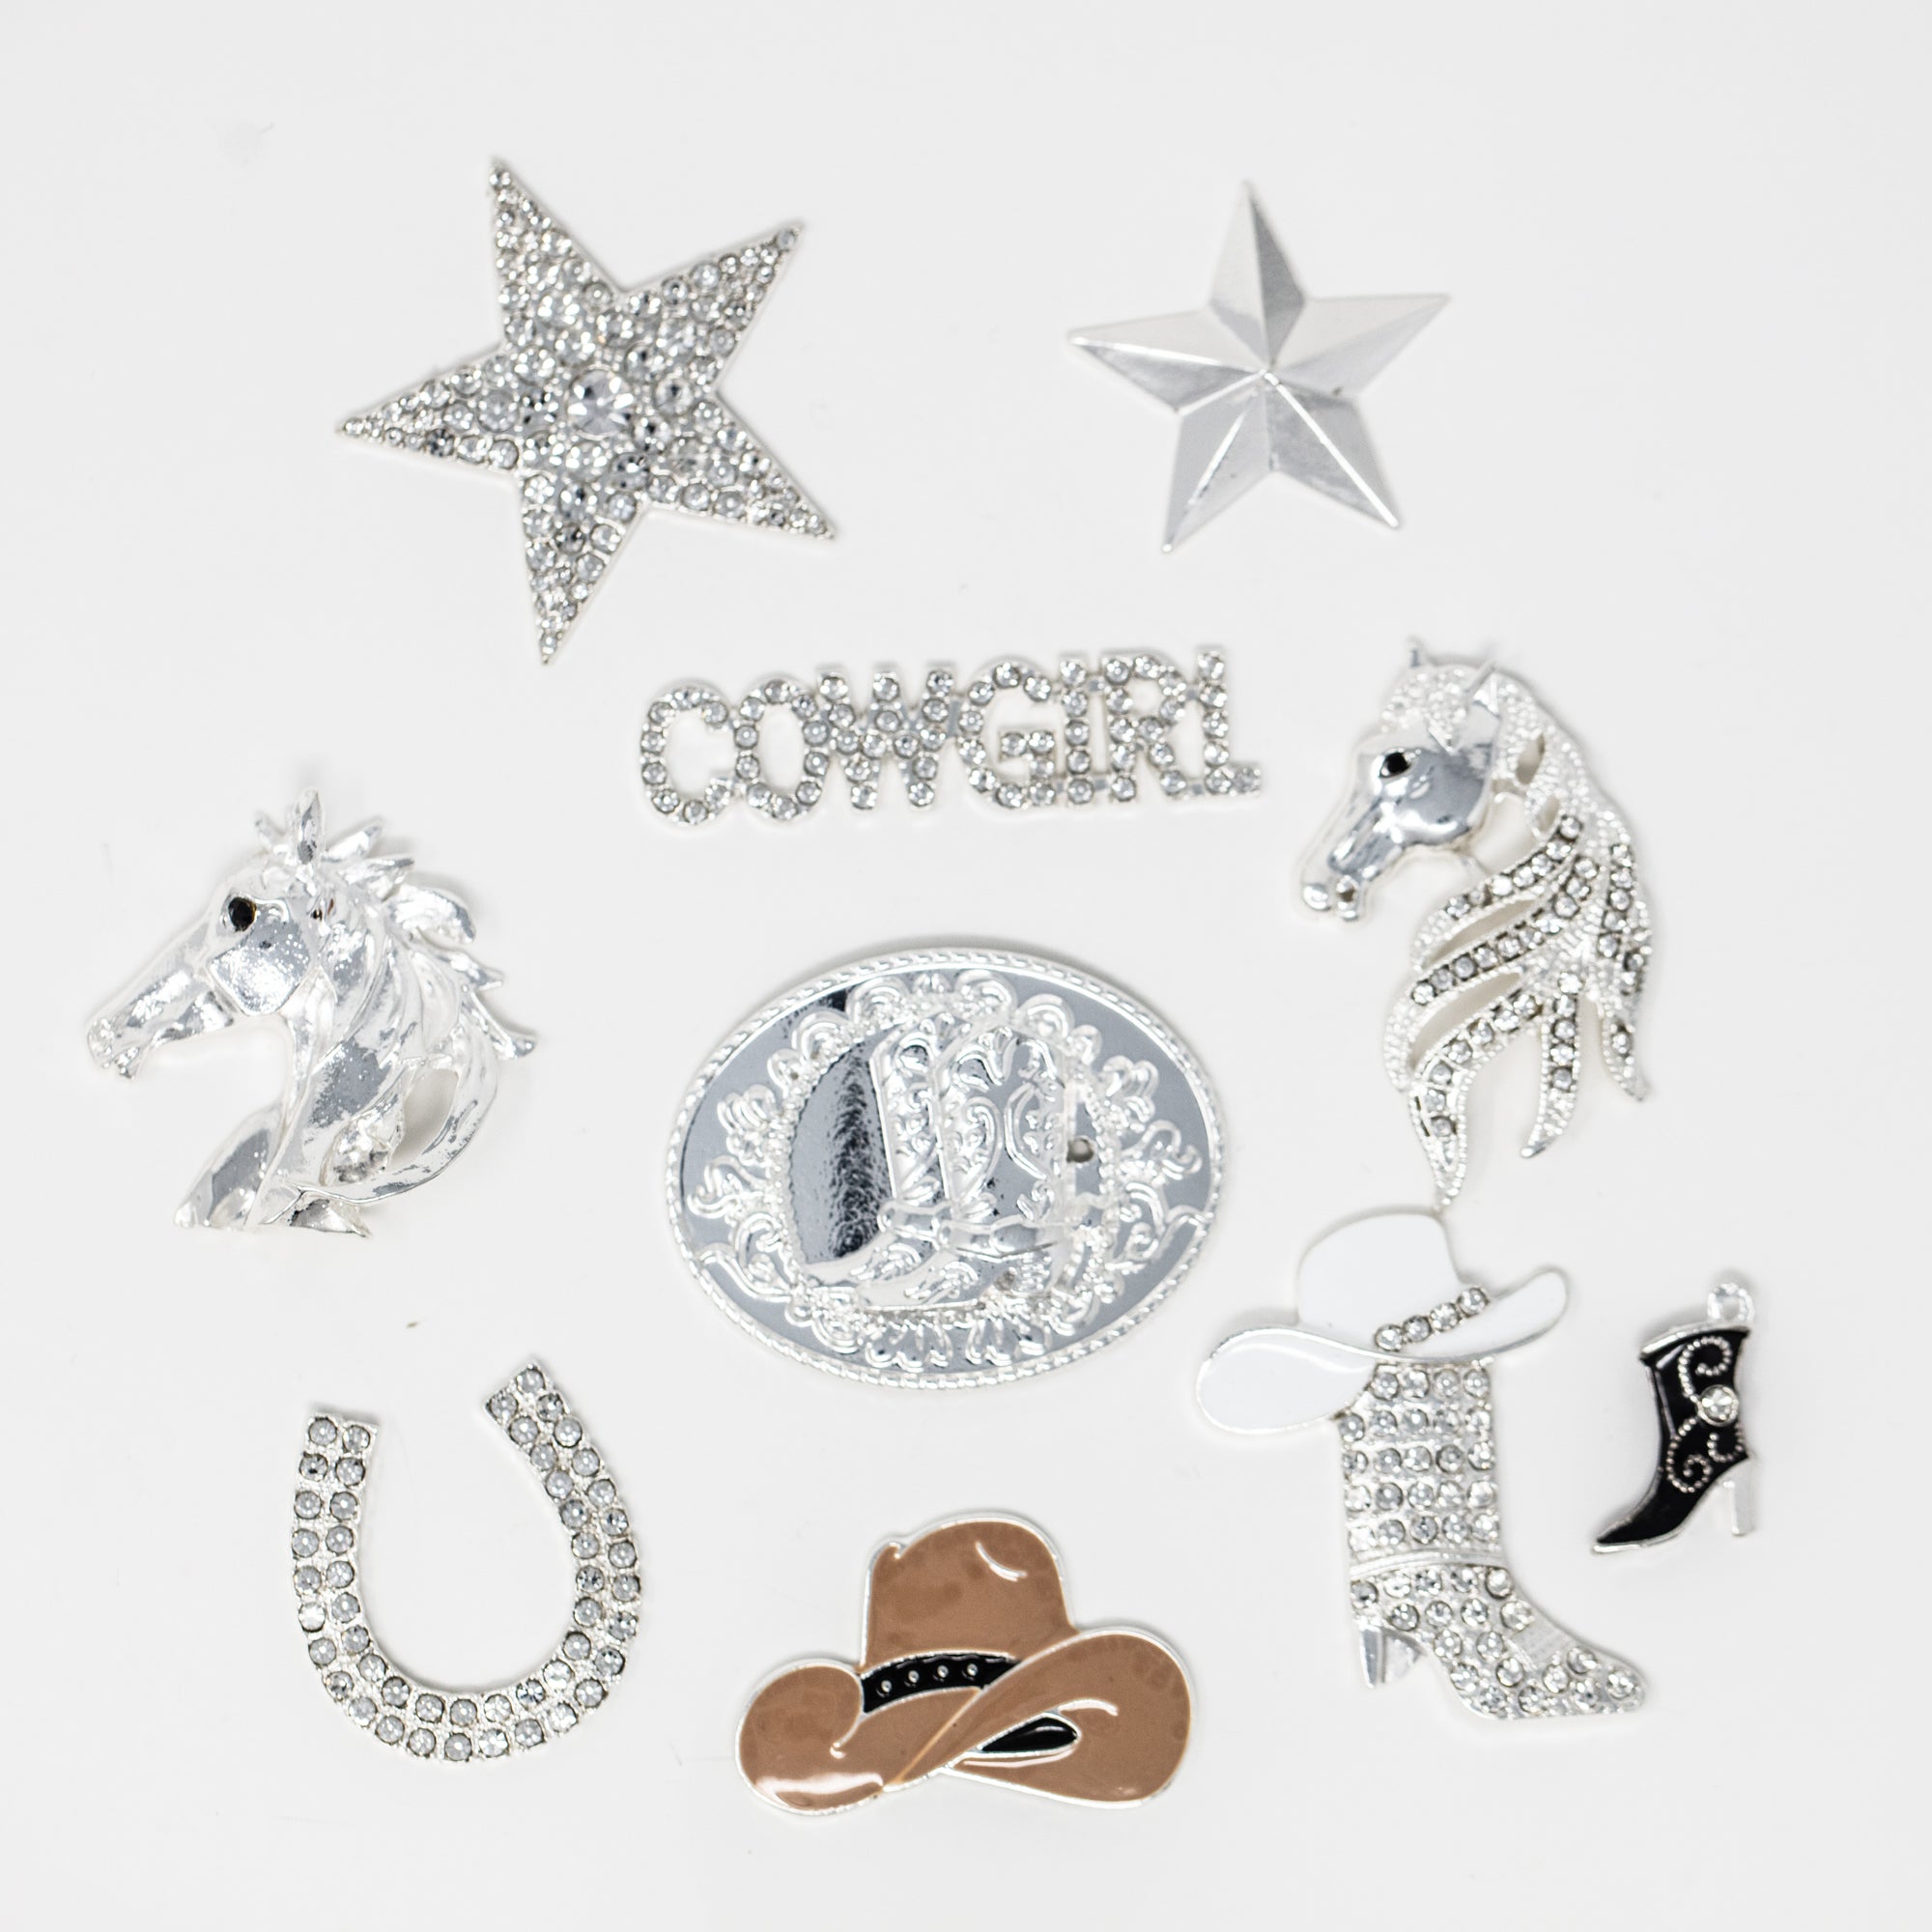 rhinestone cowgirl craft embellishments country western style bling boots hats horses and stars